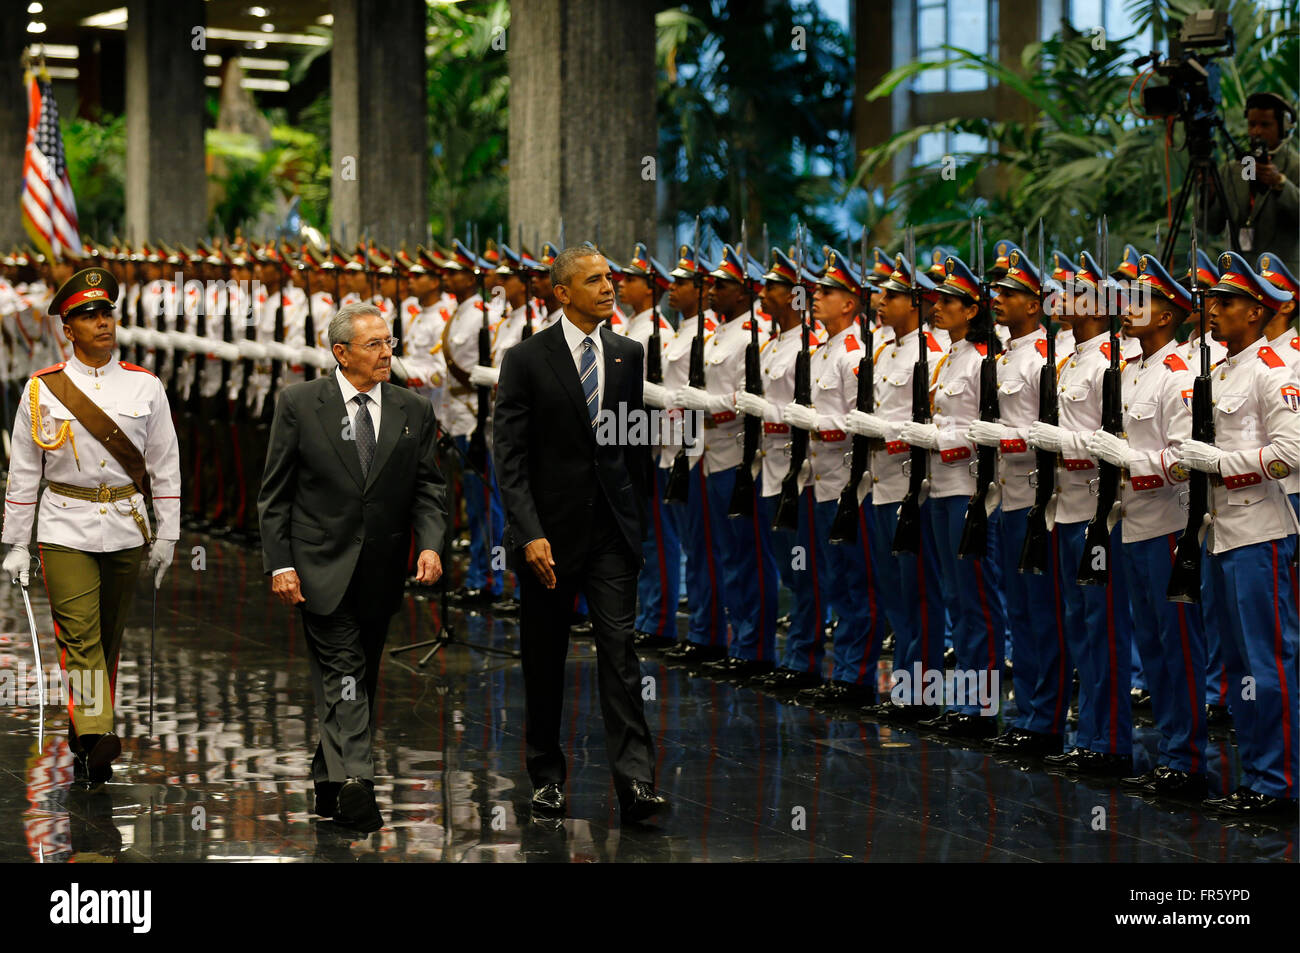 Havana, Havana. 21st Mar, 2016. Image provided by Cubadebate shows Cuba's President Raul Castro (C, front) and U.S. President Barack Obama (R, front), inspecting the guard of honour at the Palace of the Revolution, in Havana, capital of Cuba on March 21, 2016. Barack Obama on Monday paid tribute to Cuban national hero Jose Marti in Havana, starting the official program of his historic visit to Cuba to strengthen the approach between the two countries. © Cubadebate/Xinhua/Alamy Live News Stock Photo